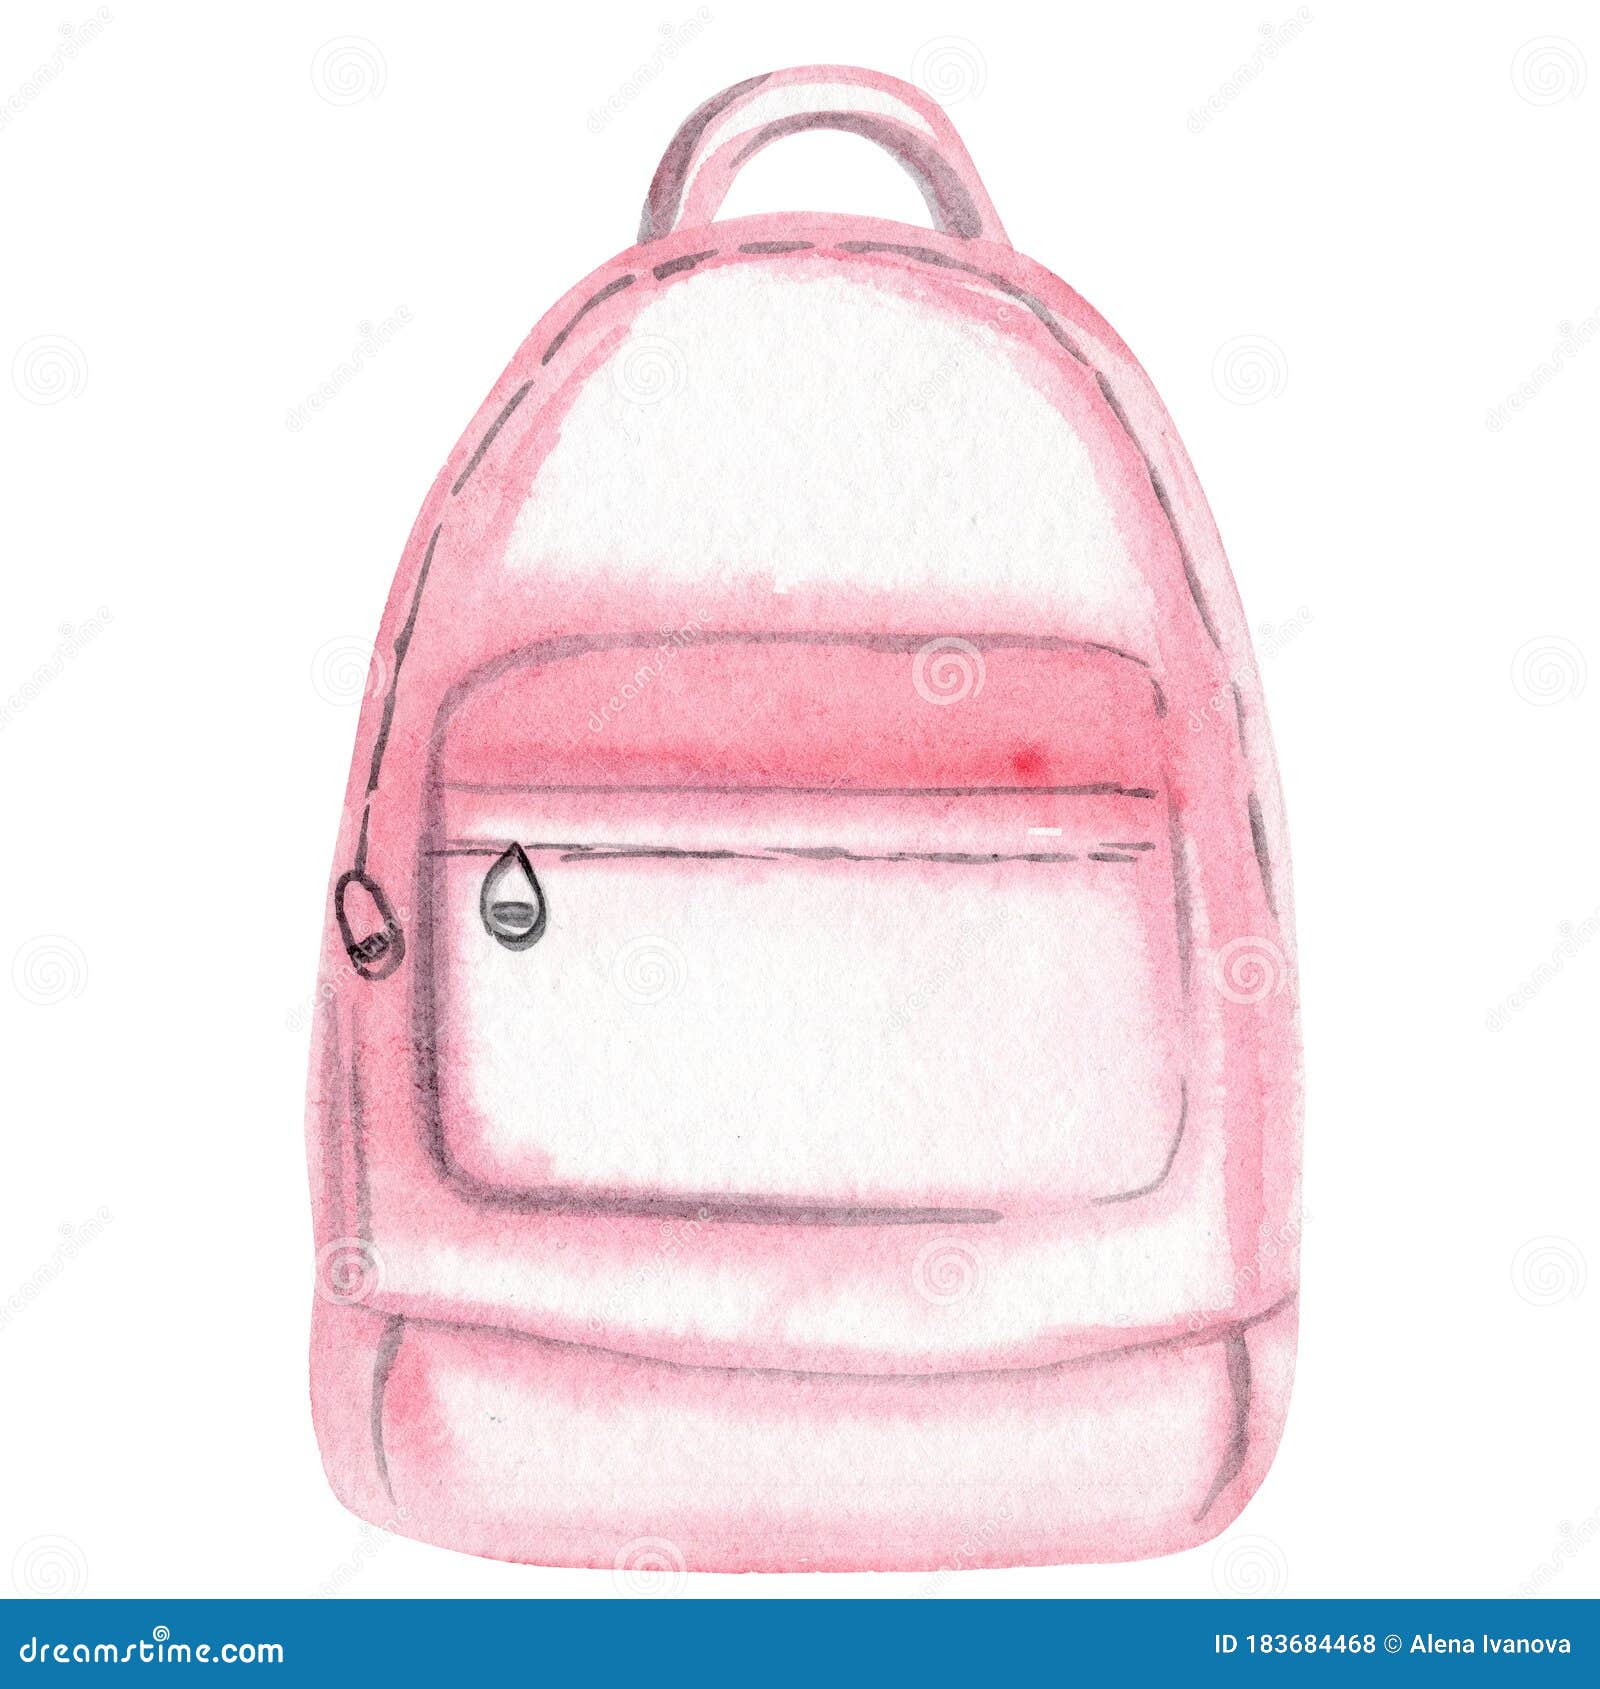 Watercolor Hand Drawn Pink School Backpack Isolated On White Background Stock Illustration - Illustration Of Female, Knapsack: 183684468